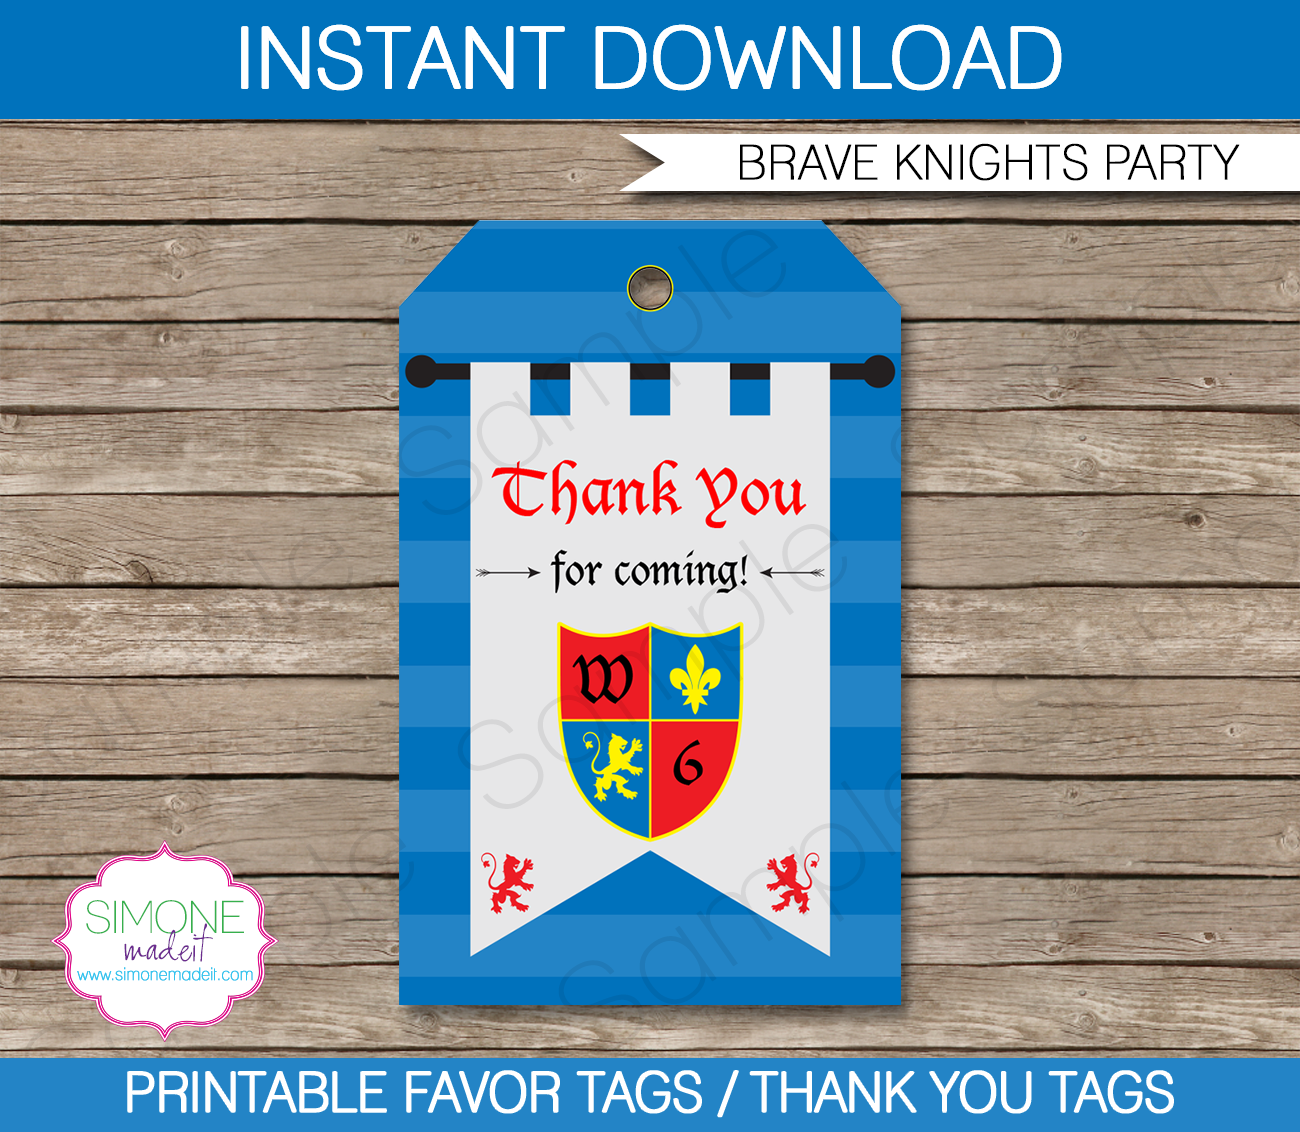 Knight Party Favor Tags | Thank You Tags | Birthday Party | Editable DIY Template | $3.00 INSTANT DOWNLOAD via SIMONEmadeit.com